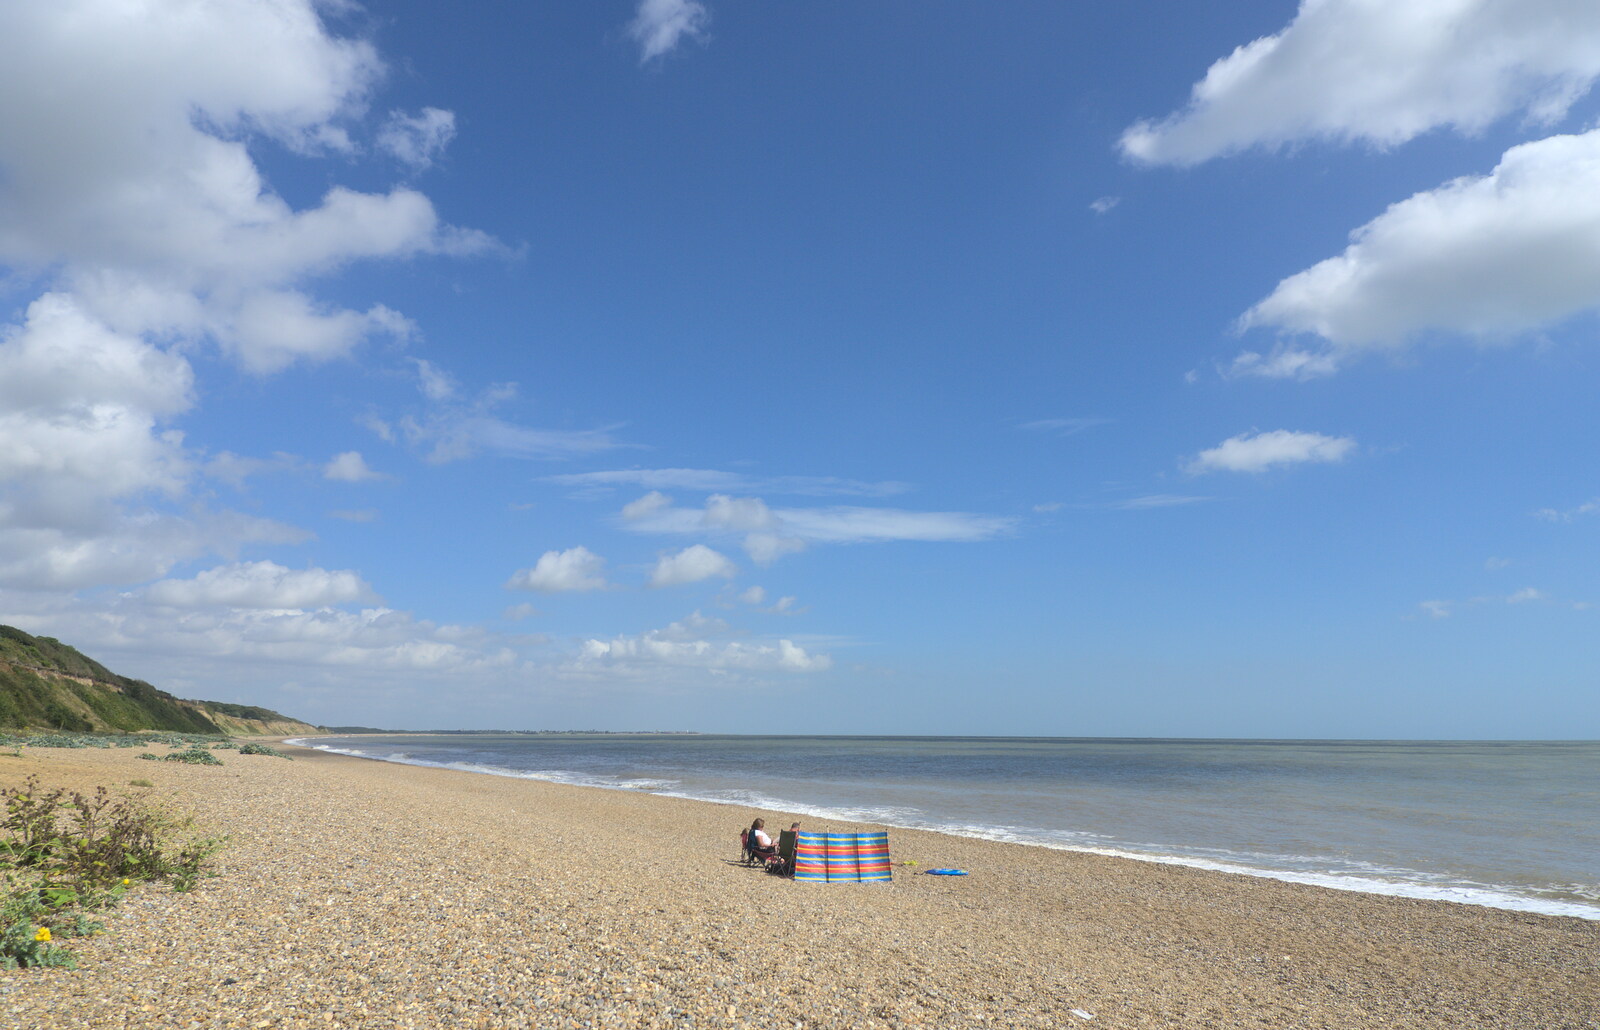 A solitary windbreak from Camping by the Seaside, Cliff House, Dunwich, Suffolk - 15th August 2012